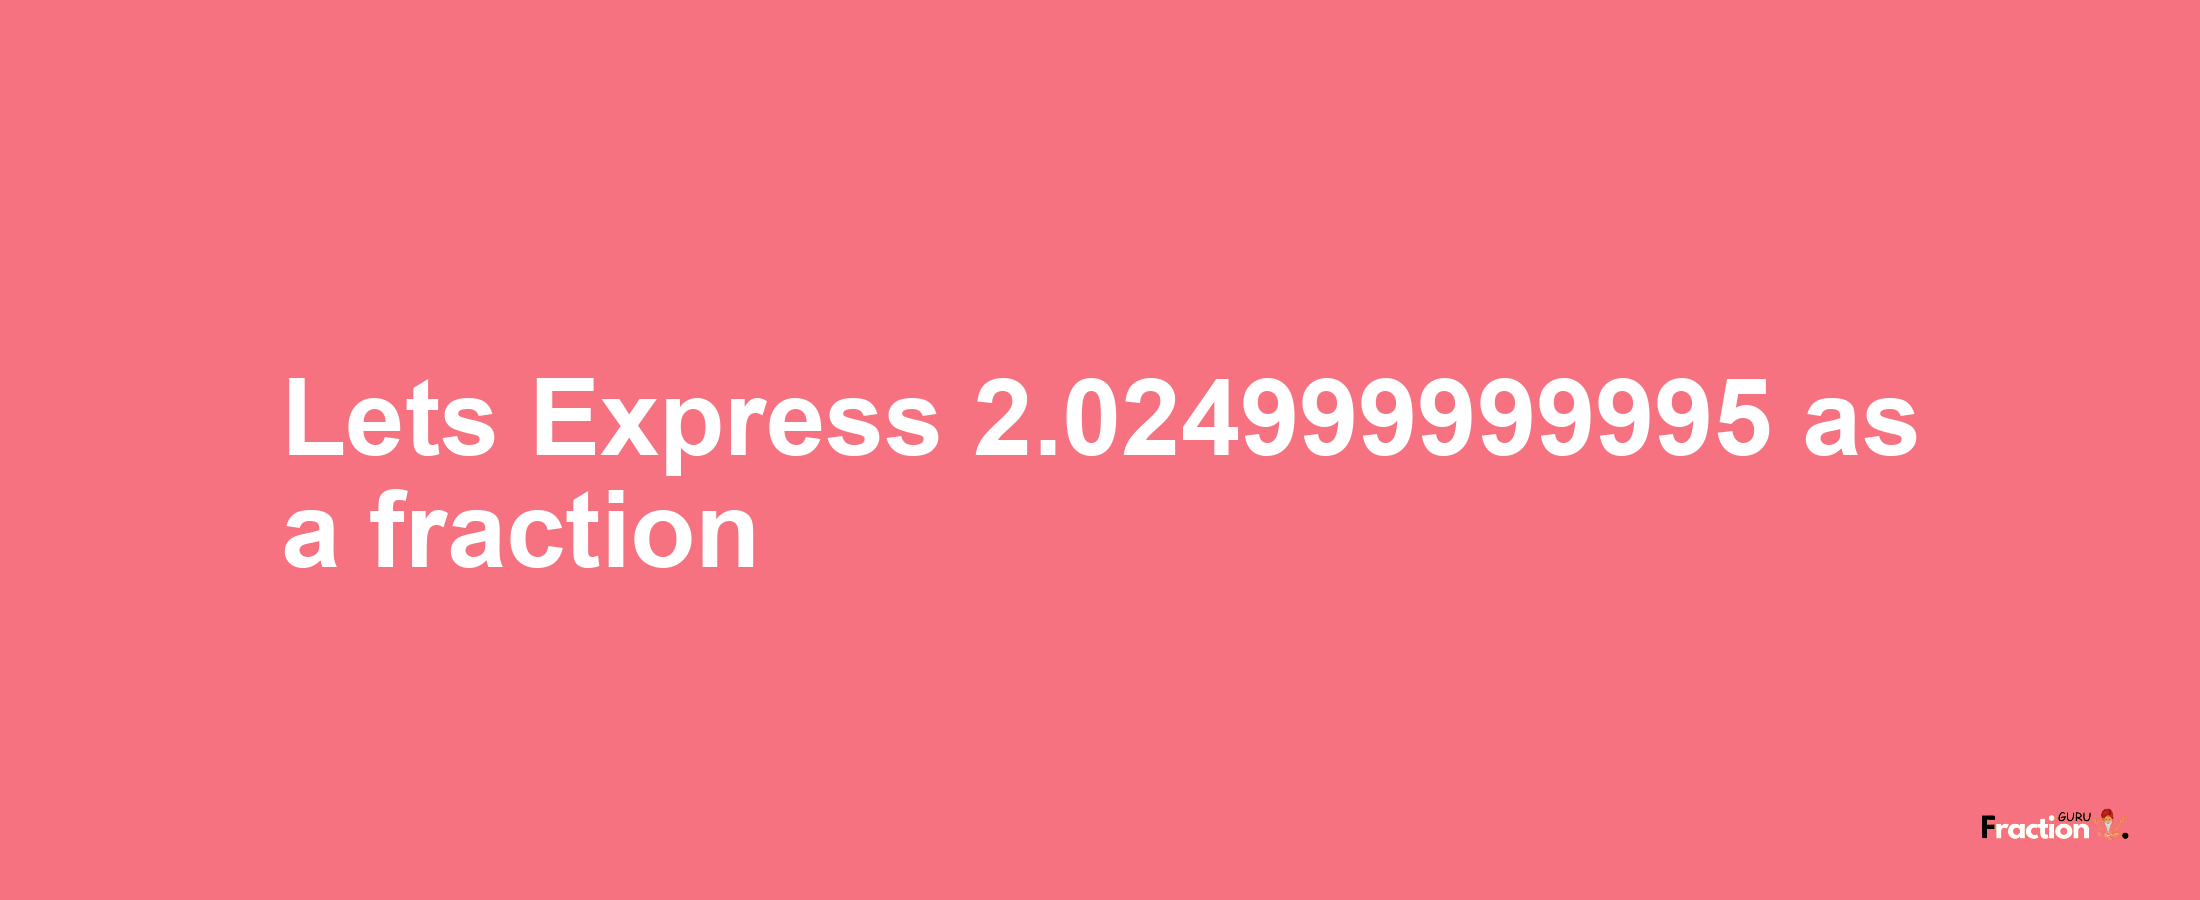 Lets Express 2.024999999995 as afraction